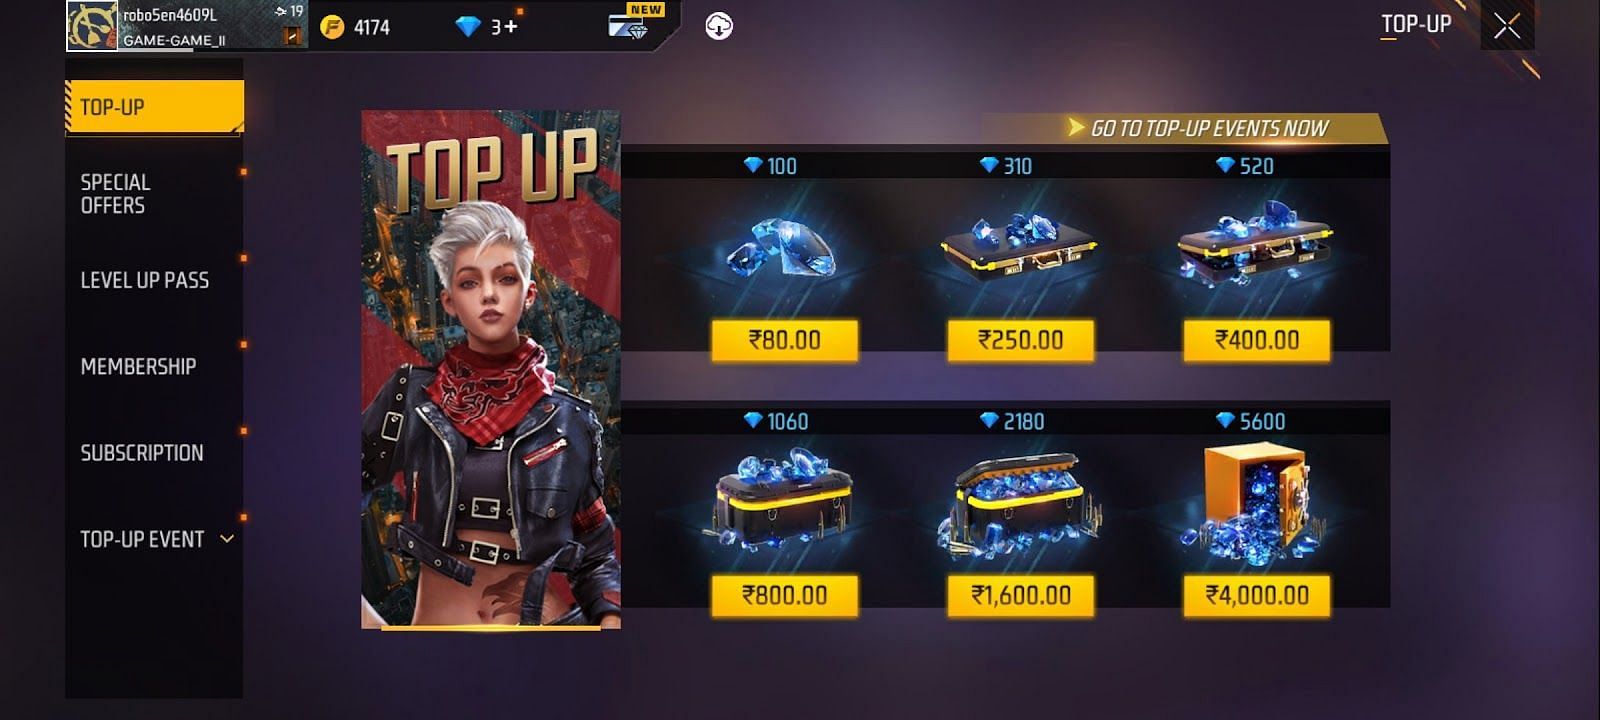 How to purchase diamonds in the game (Image via Garena)